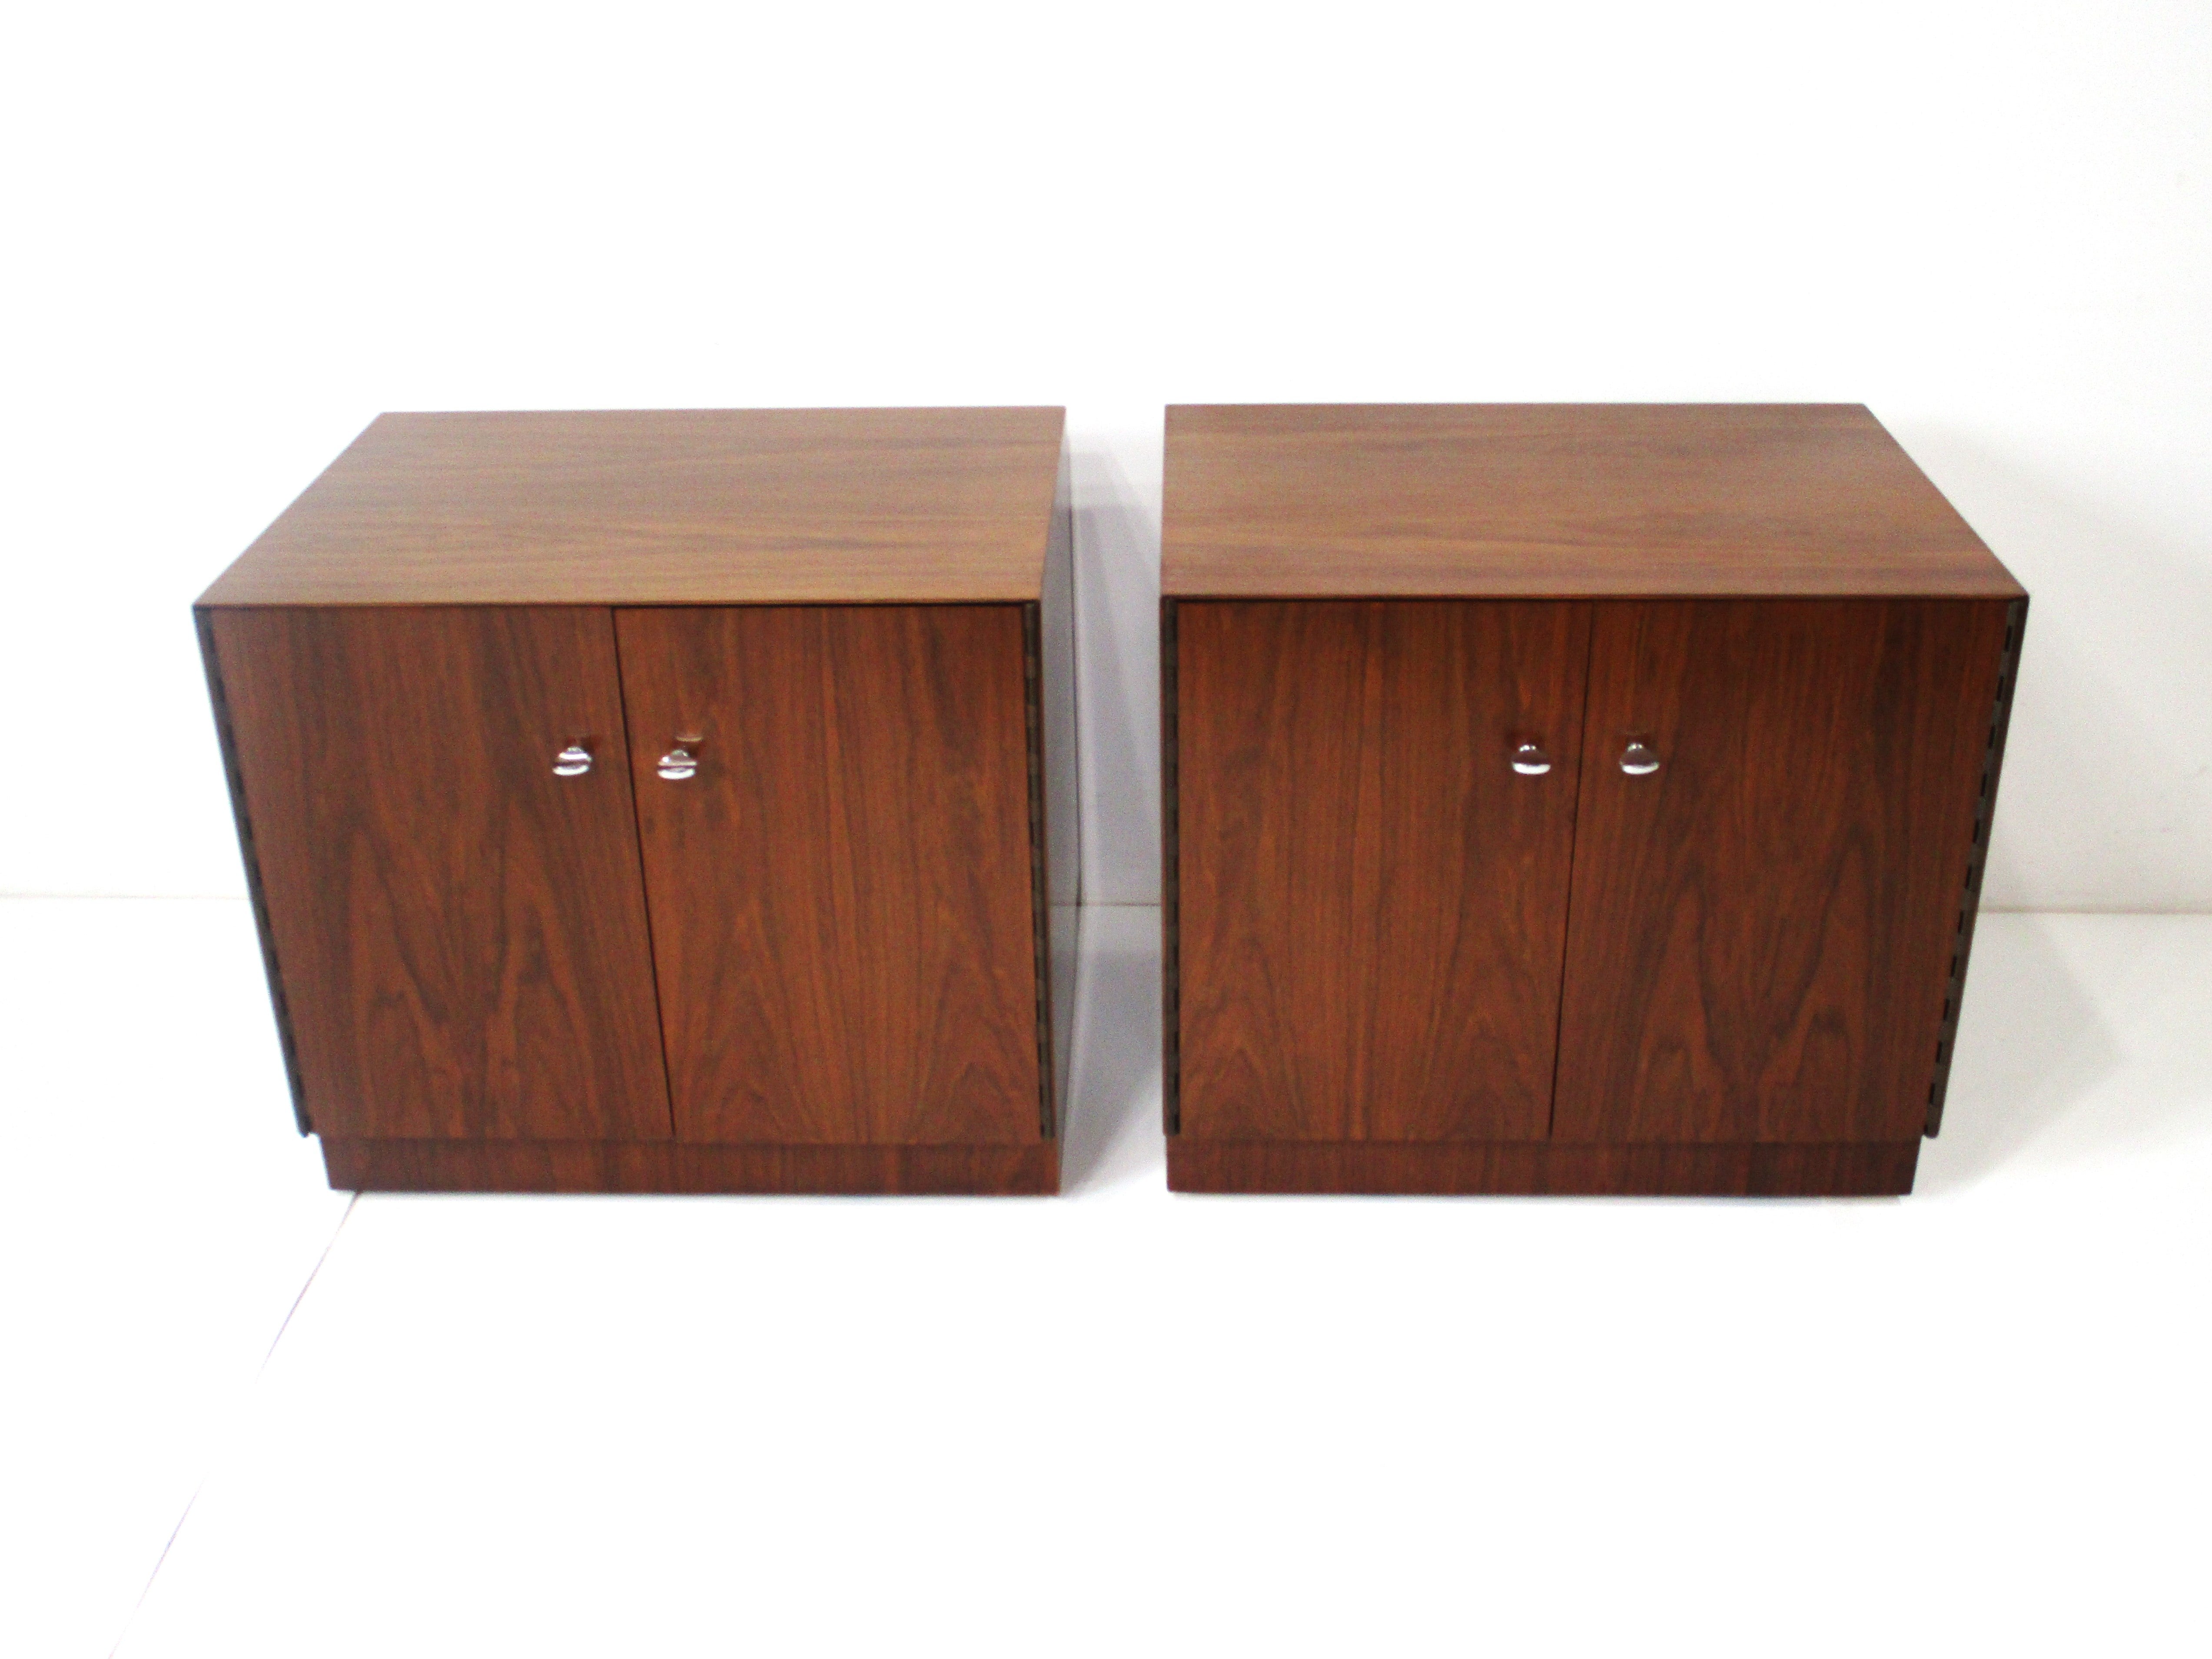 A pair of very well crafted walnut Mid Century nightstands with wonderful rich graining in the manner of Milo Baughman and Harvey Probber . Having double doors with sturdy piano styled hinges , heavy chromed metal pulls and an adjustable shelve